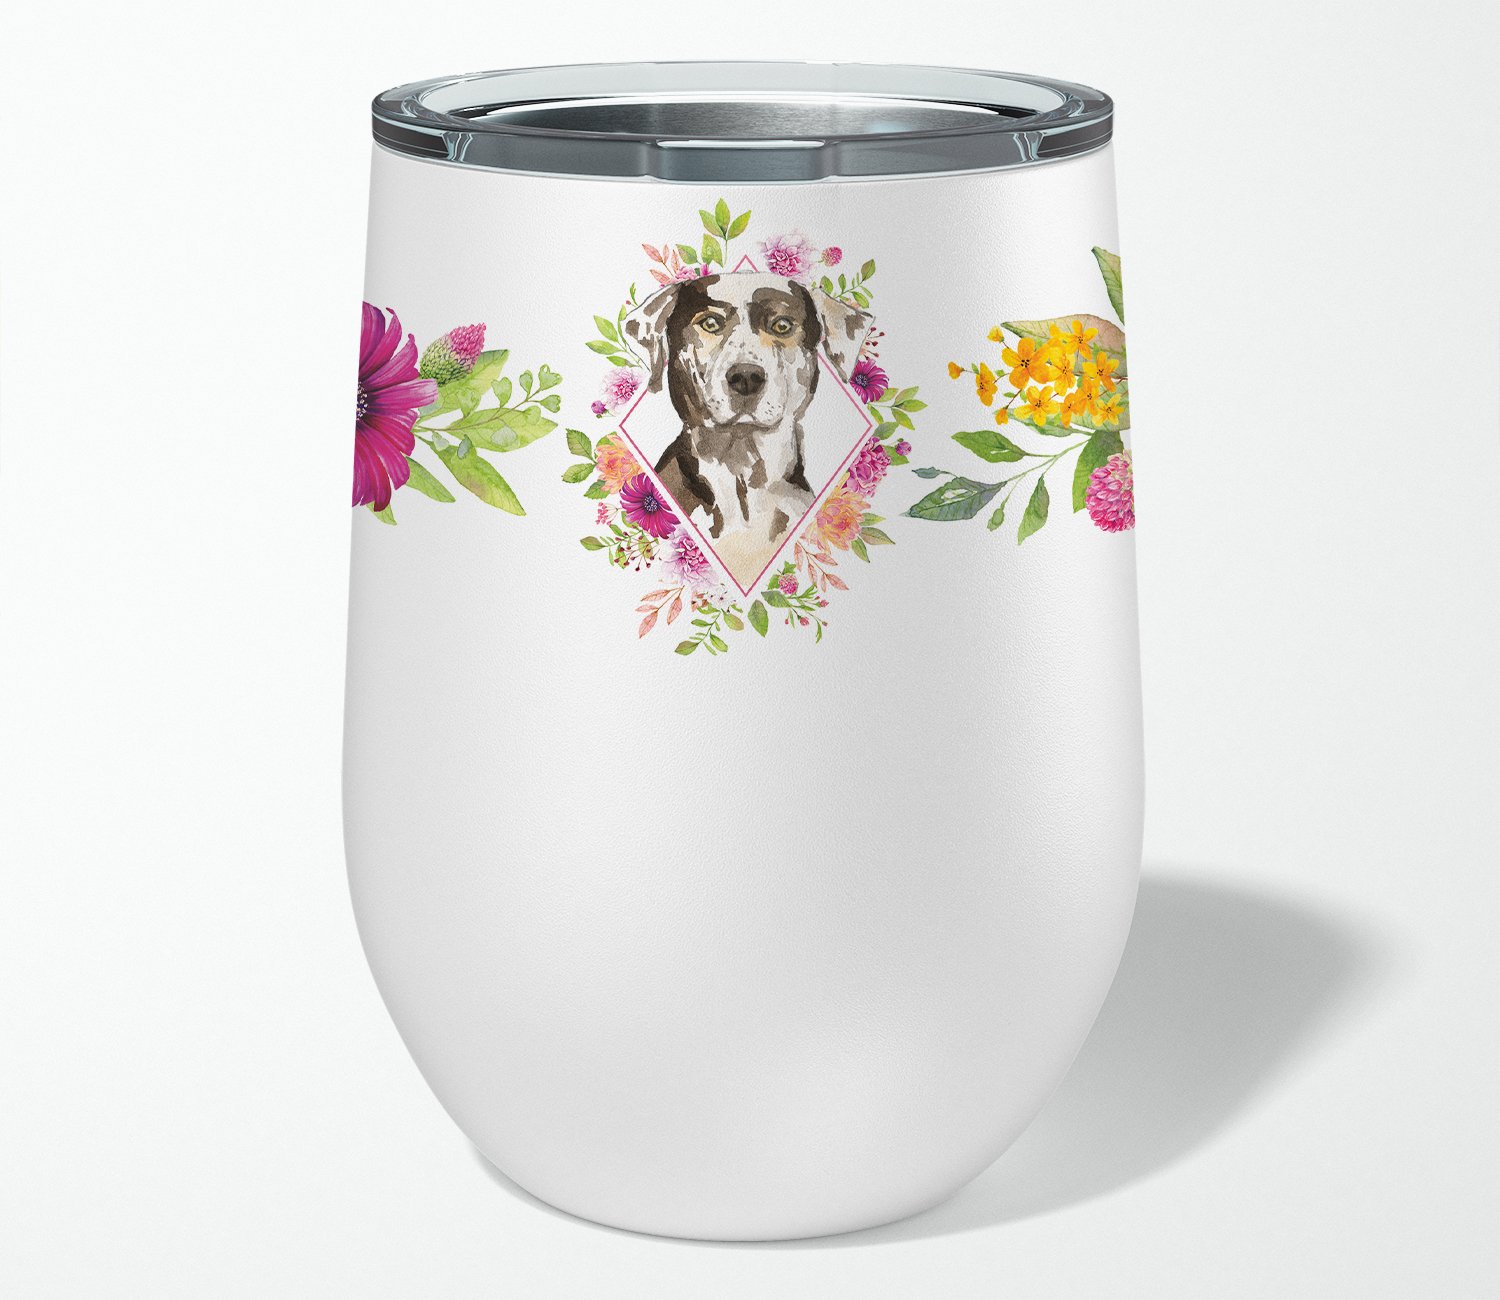 Catahoula Leopard Dog Pink Flowers Stainless Steel 12 oz Stemless Wine Glass CK4249TBL12 by Caroline's Treasures